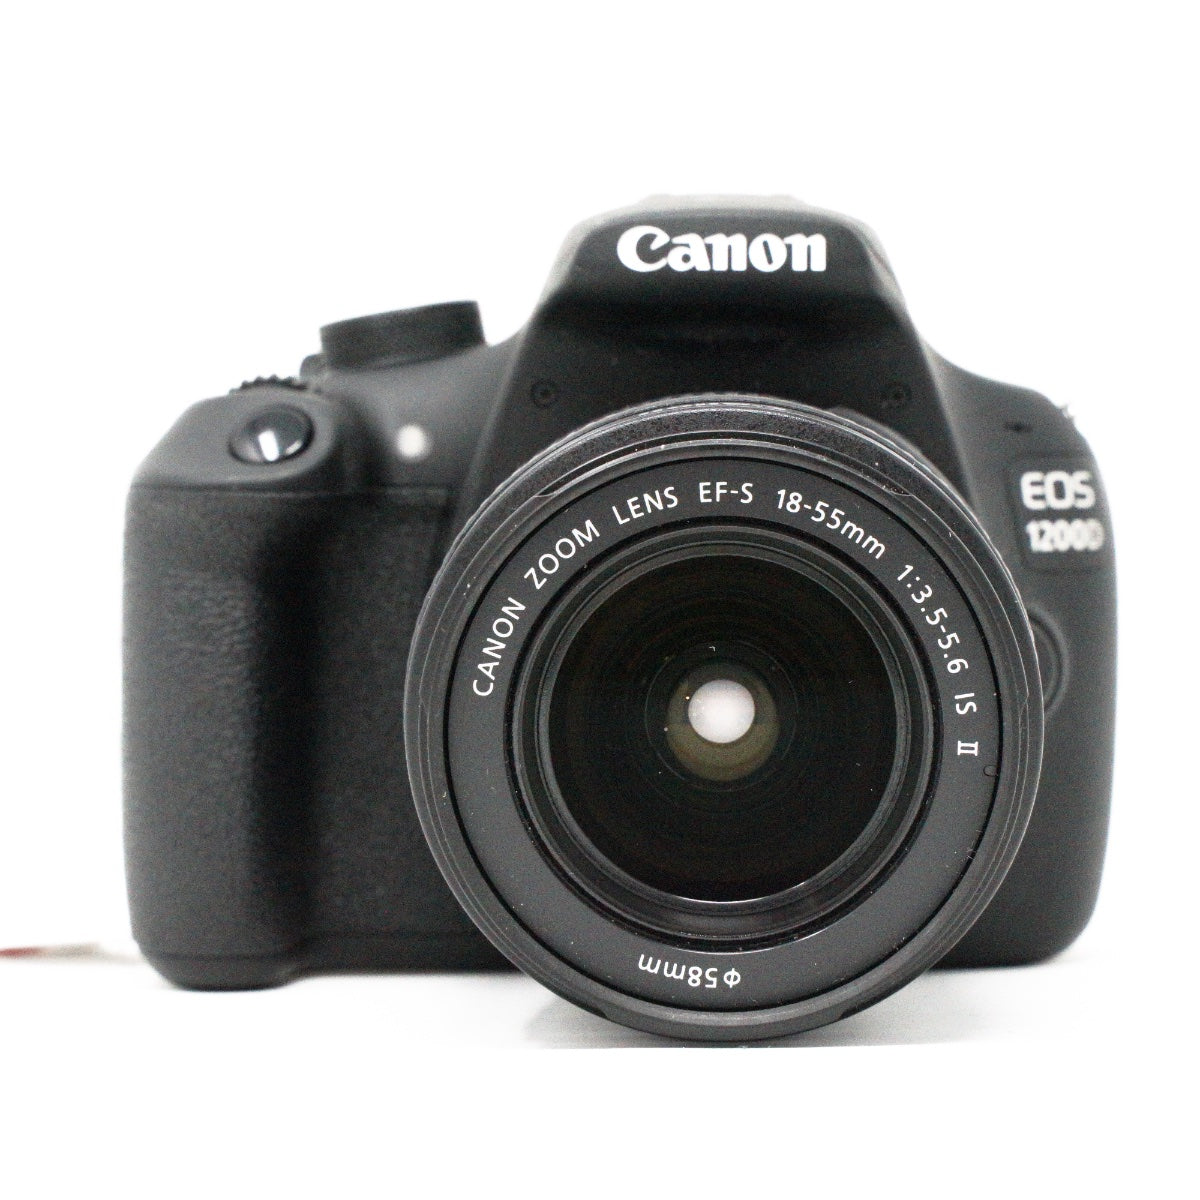 Used Canon EOS 1200D + 18-55mm F3.5/5.6 IS II kit+ spare battery